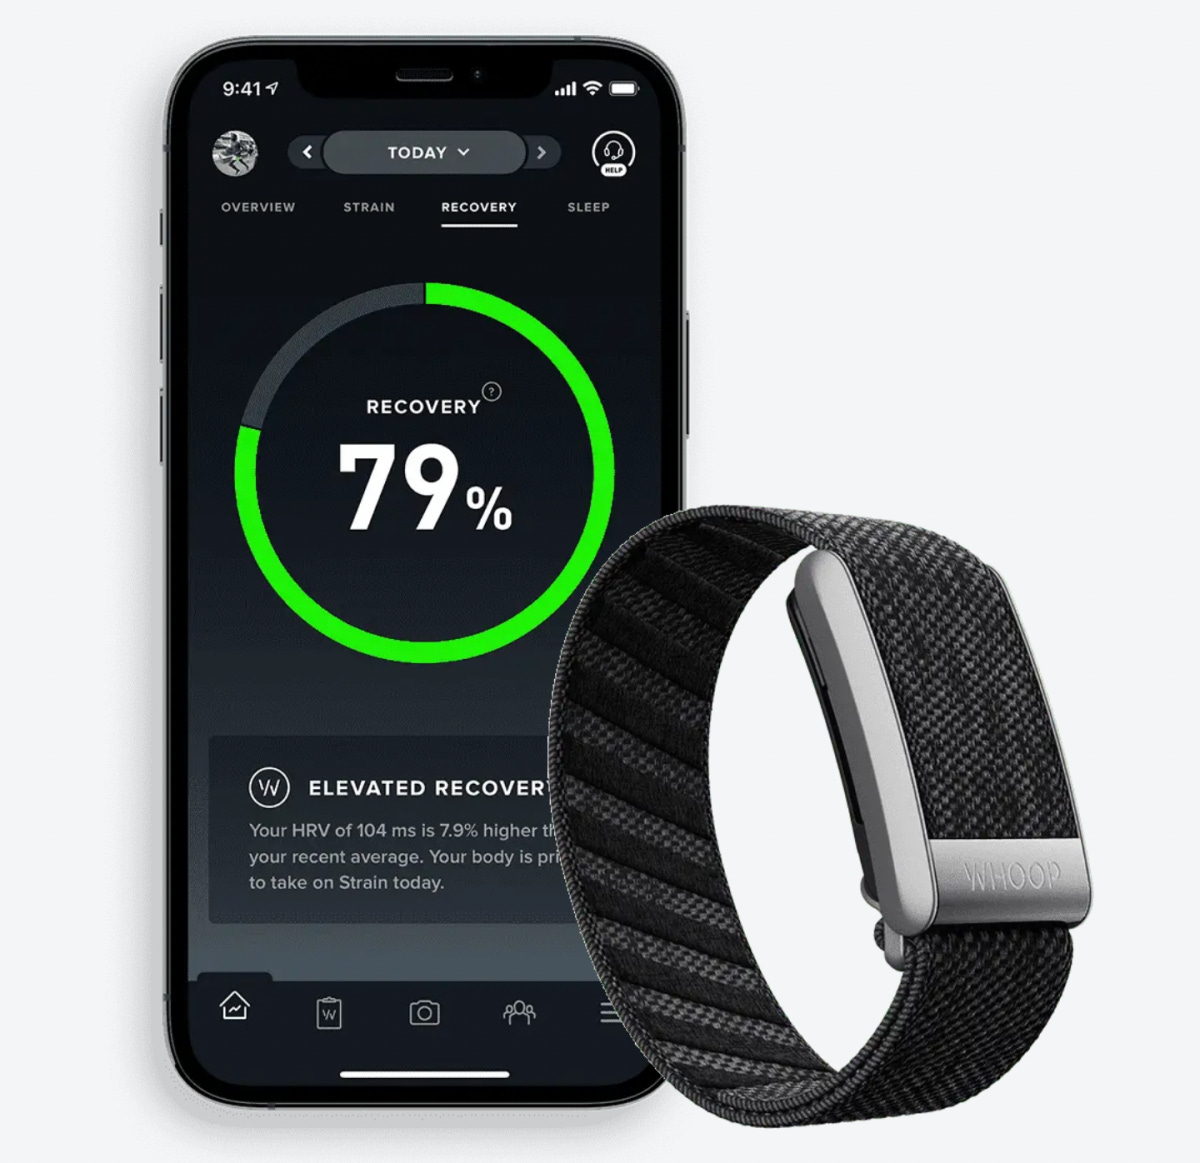 A WHOOP smart band and app